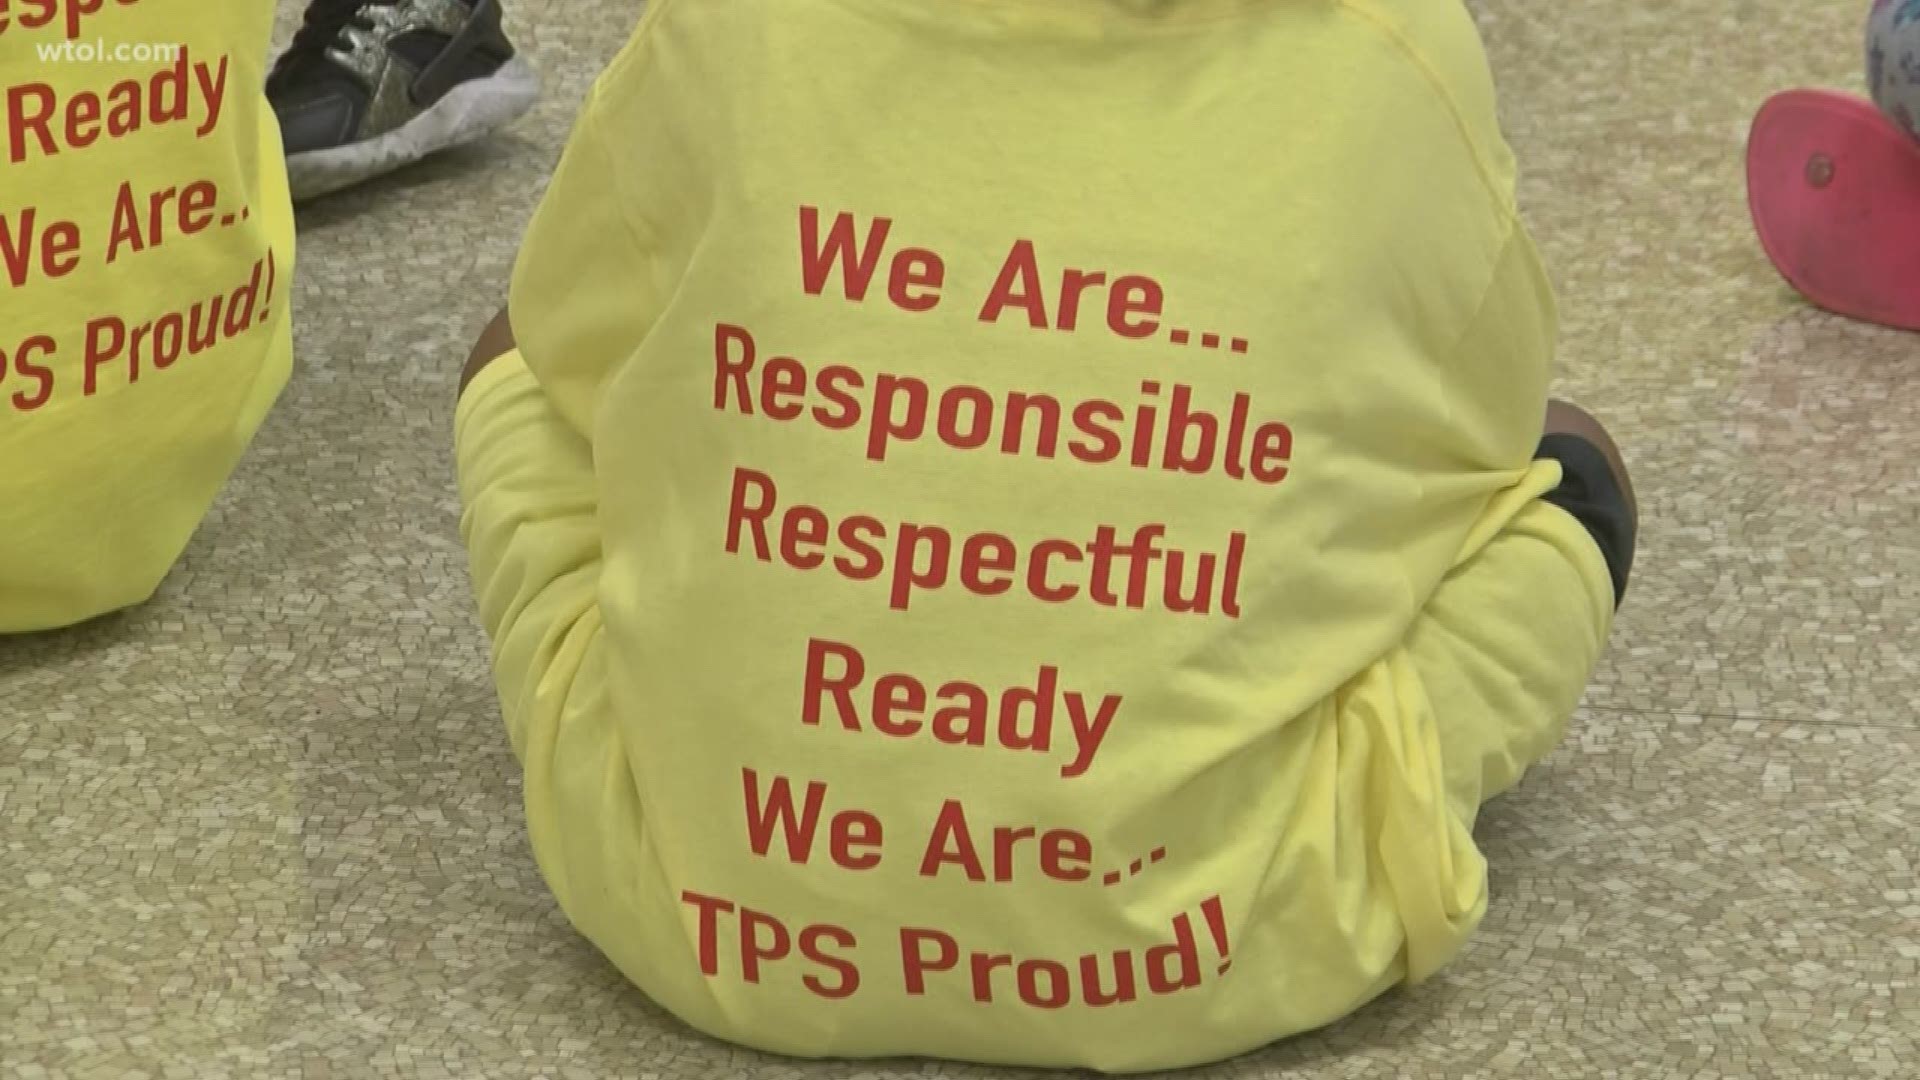 TPS students will head back to school in less than a month. The district hosted an event on Tuesday to get student and parents ready.